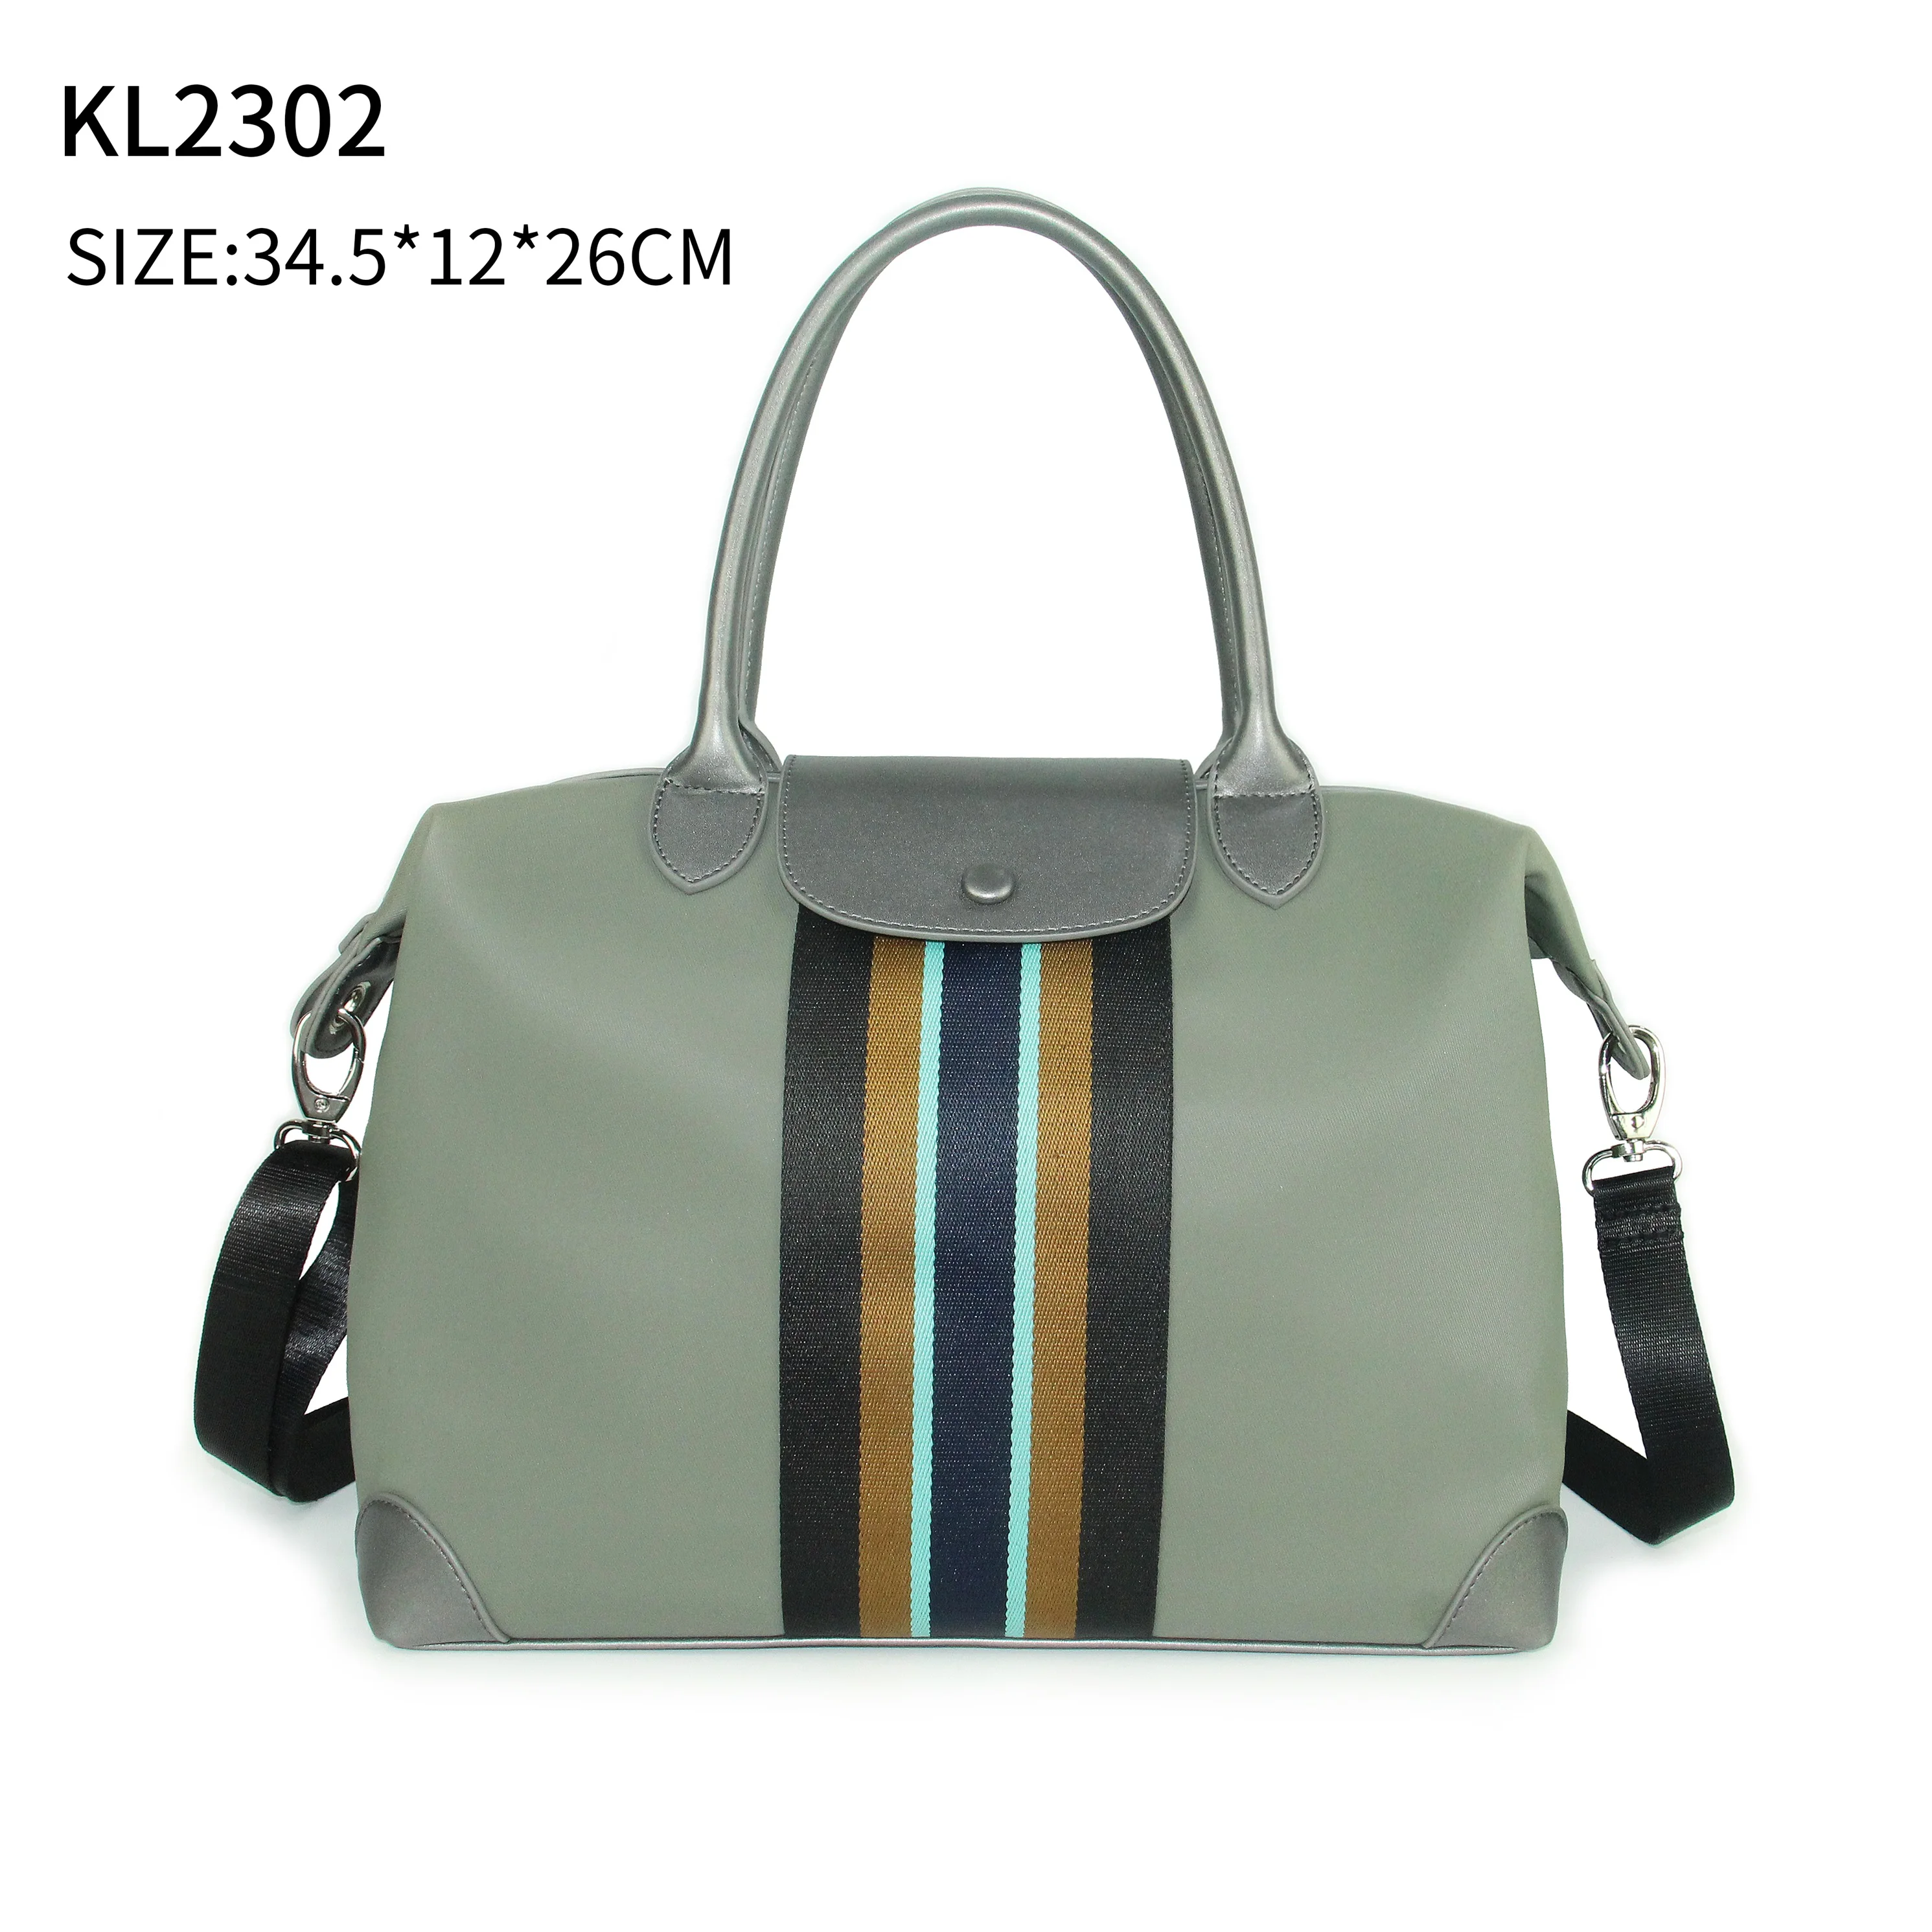 2021 New Arrival Hand bags For Women Fashinal Wholesale Women Bags